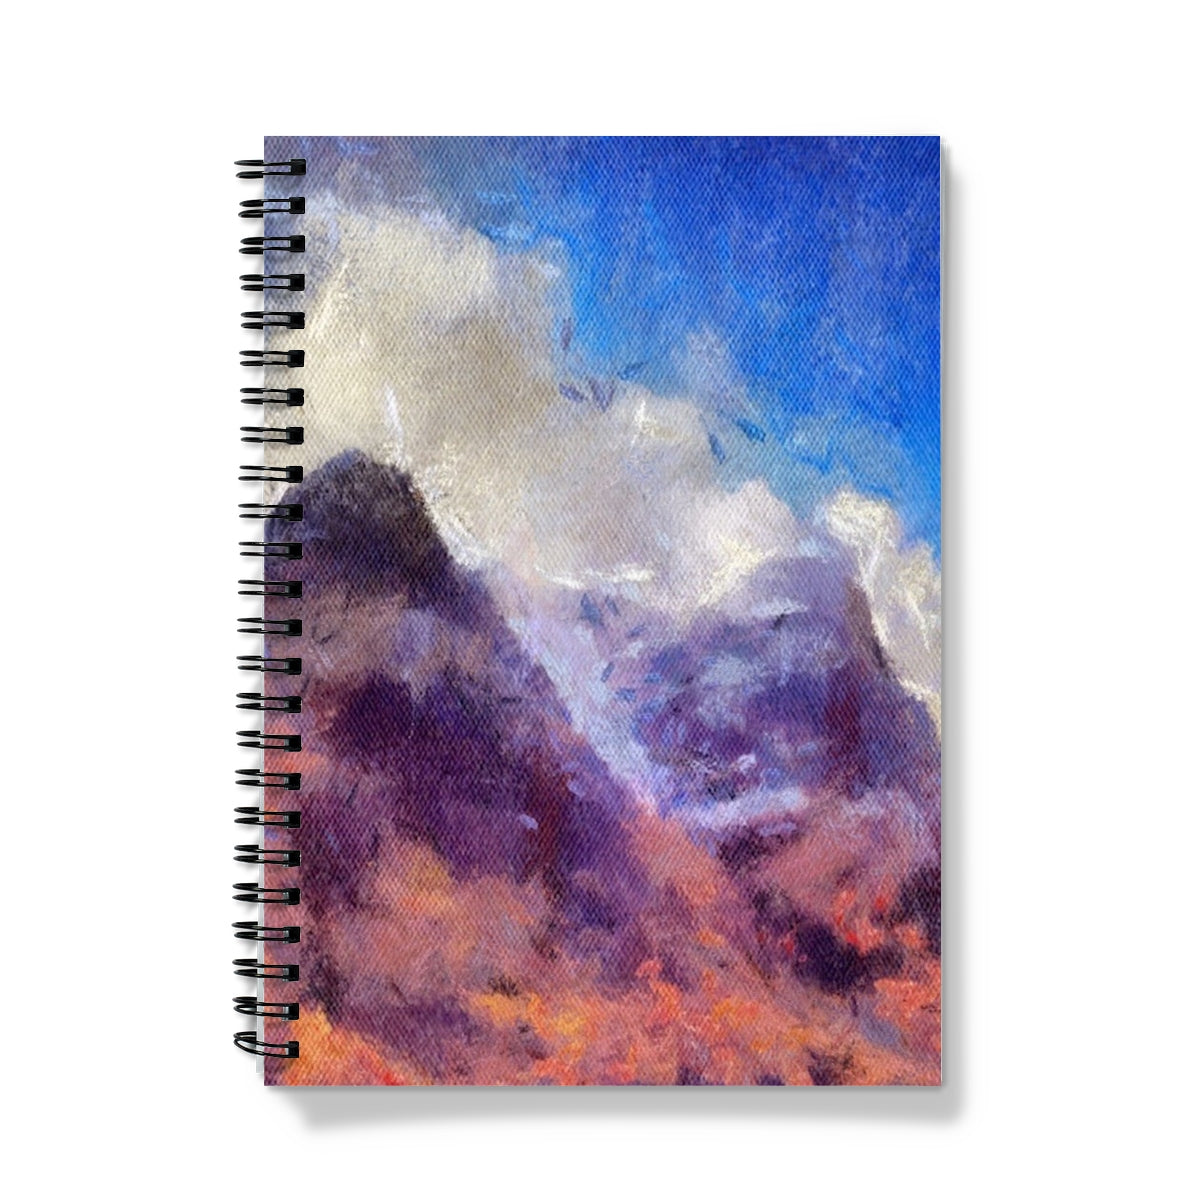 Glencoe Art Gifts Notebook-Journals & Notebooks-Glencoe Art Gallery-A5-Graph-Paintings, Prints, Homeware, Art Gifts From Scotland By Scottish Artist Kevin Hunter